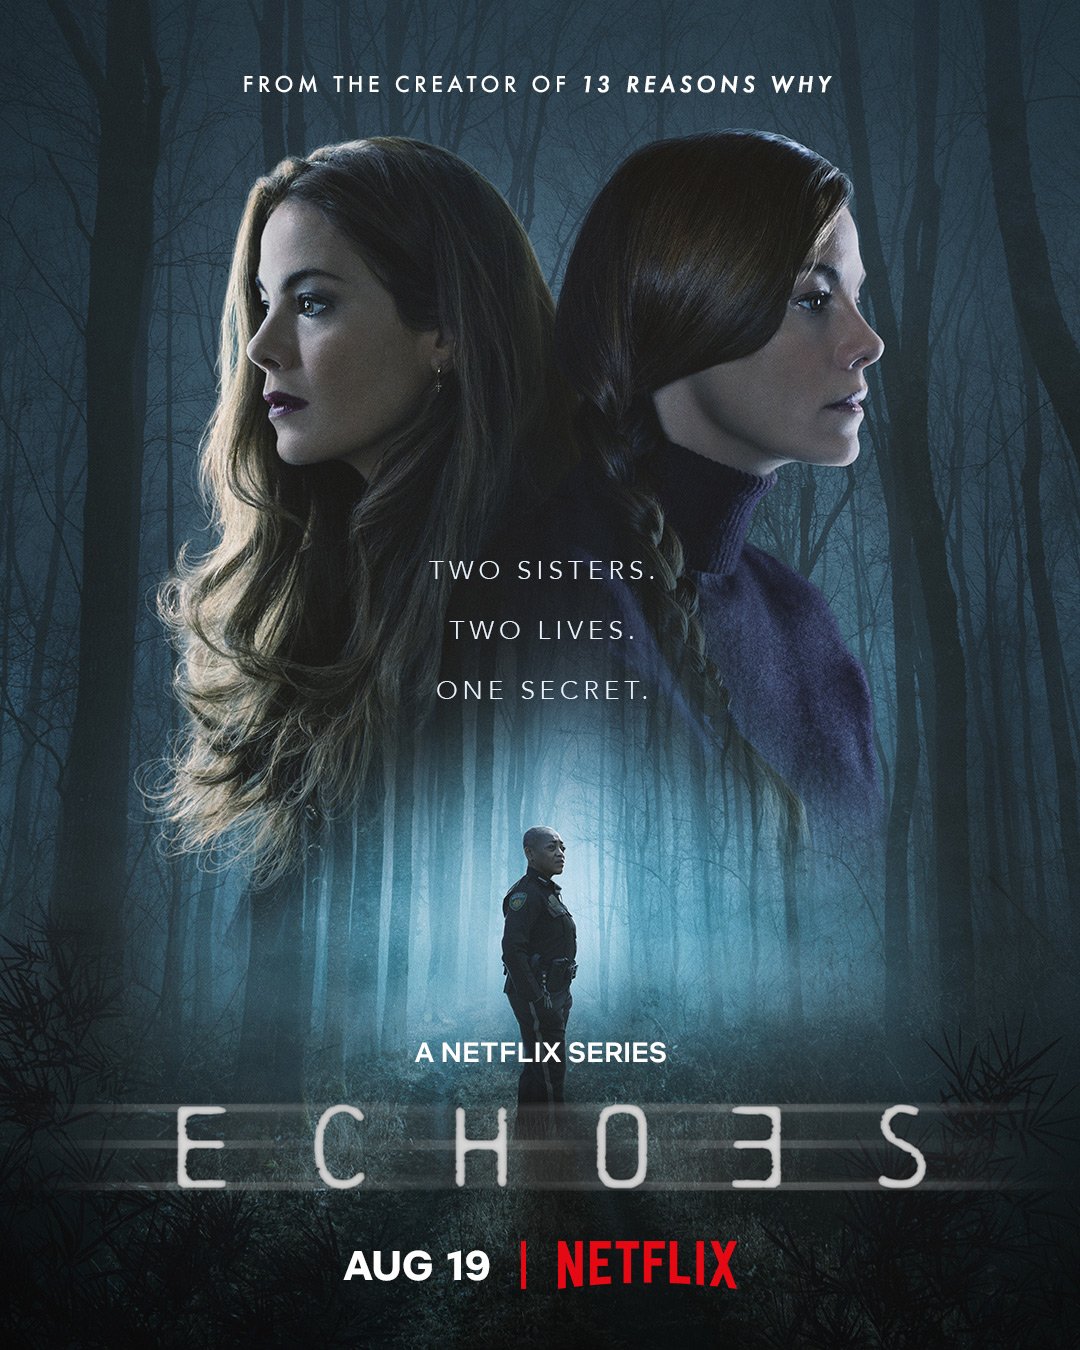 Is “Echoes” on Netflix